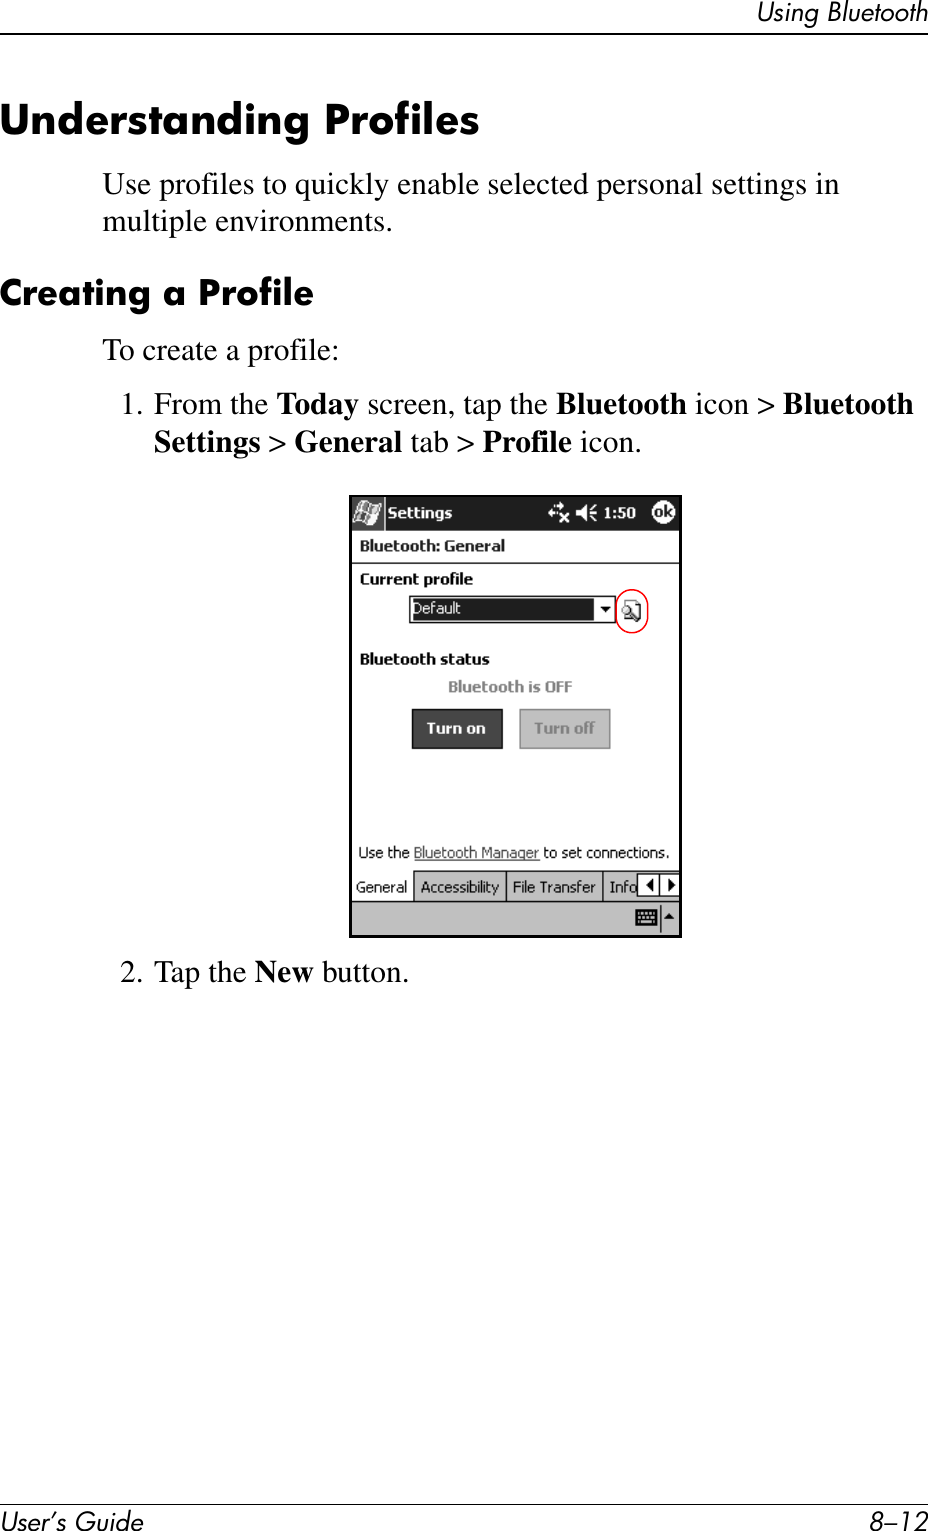 User’s Guide 8–12Using BluetoothUnderstanding ProfilesUse profiles to quickly enable selected personal settings in multiple environments.Creating a ProfileTo create a profile:1. From the Today screen, tap the Bluetooth icon &gt; Bluetooth Settings &gt; General tab &gt; Profile icon.2. Tap the New button.